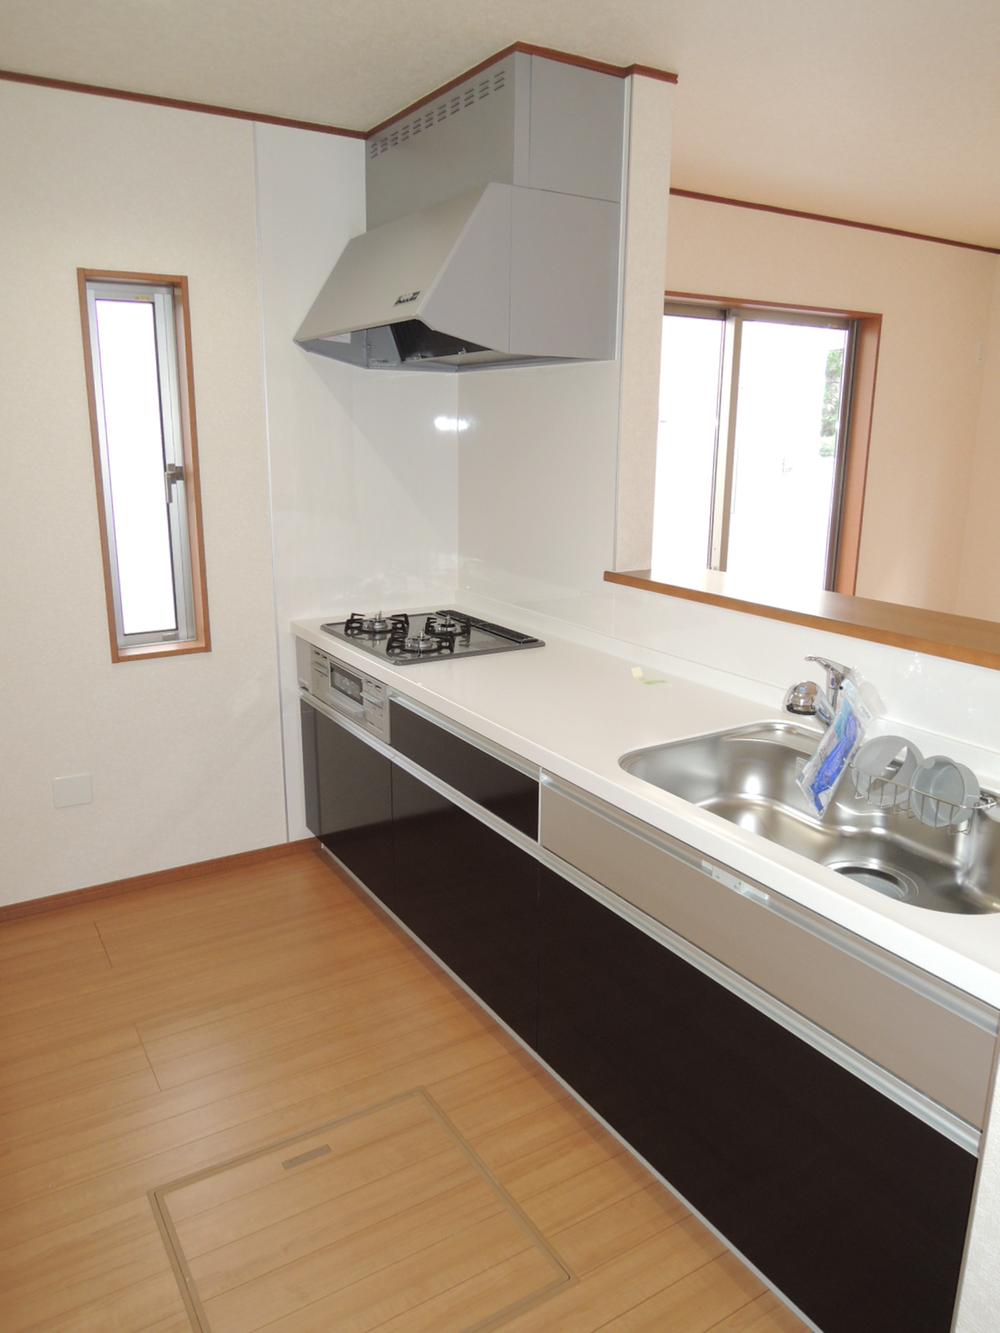 Same specifications photo (kitchen). Same specifications  ■ ◇ Corporation housing market ◇ ■